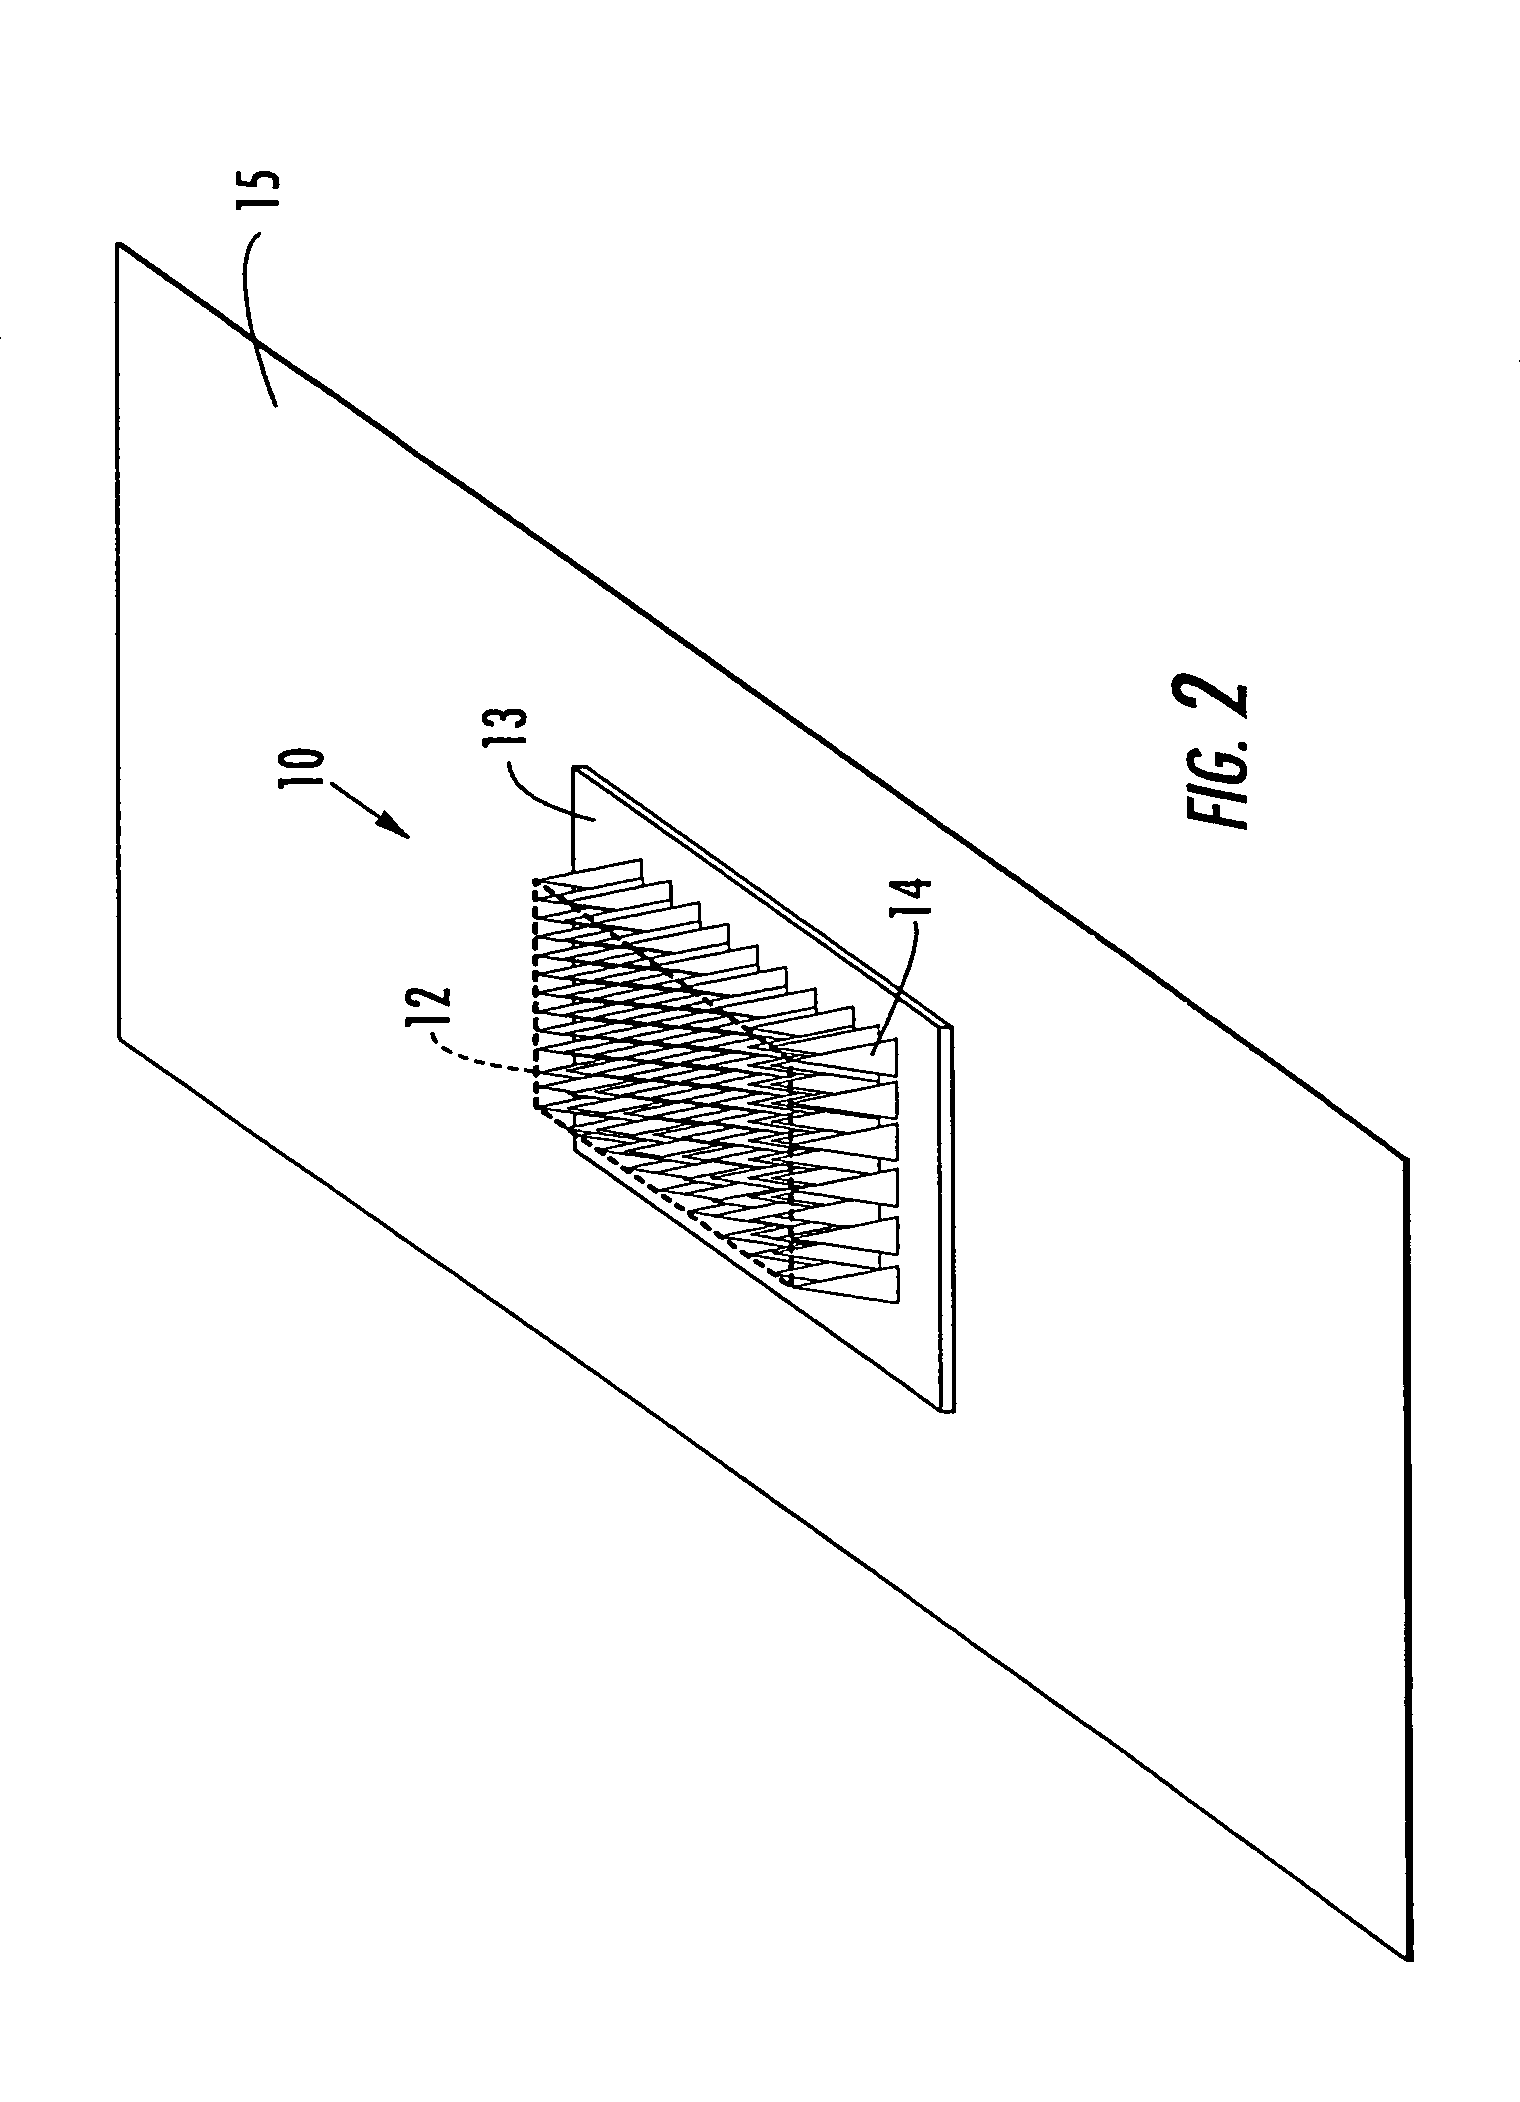 Applicator for applying functional substances into human skin